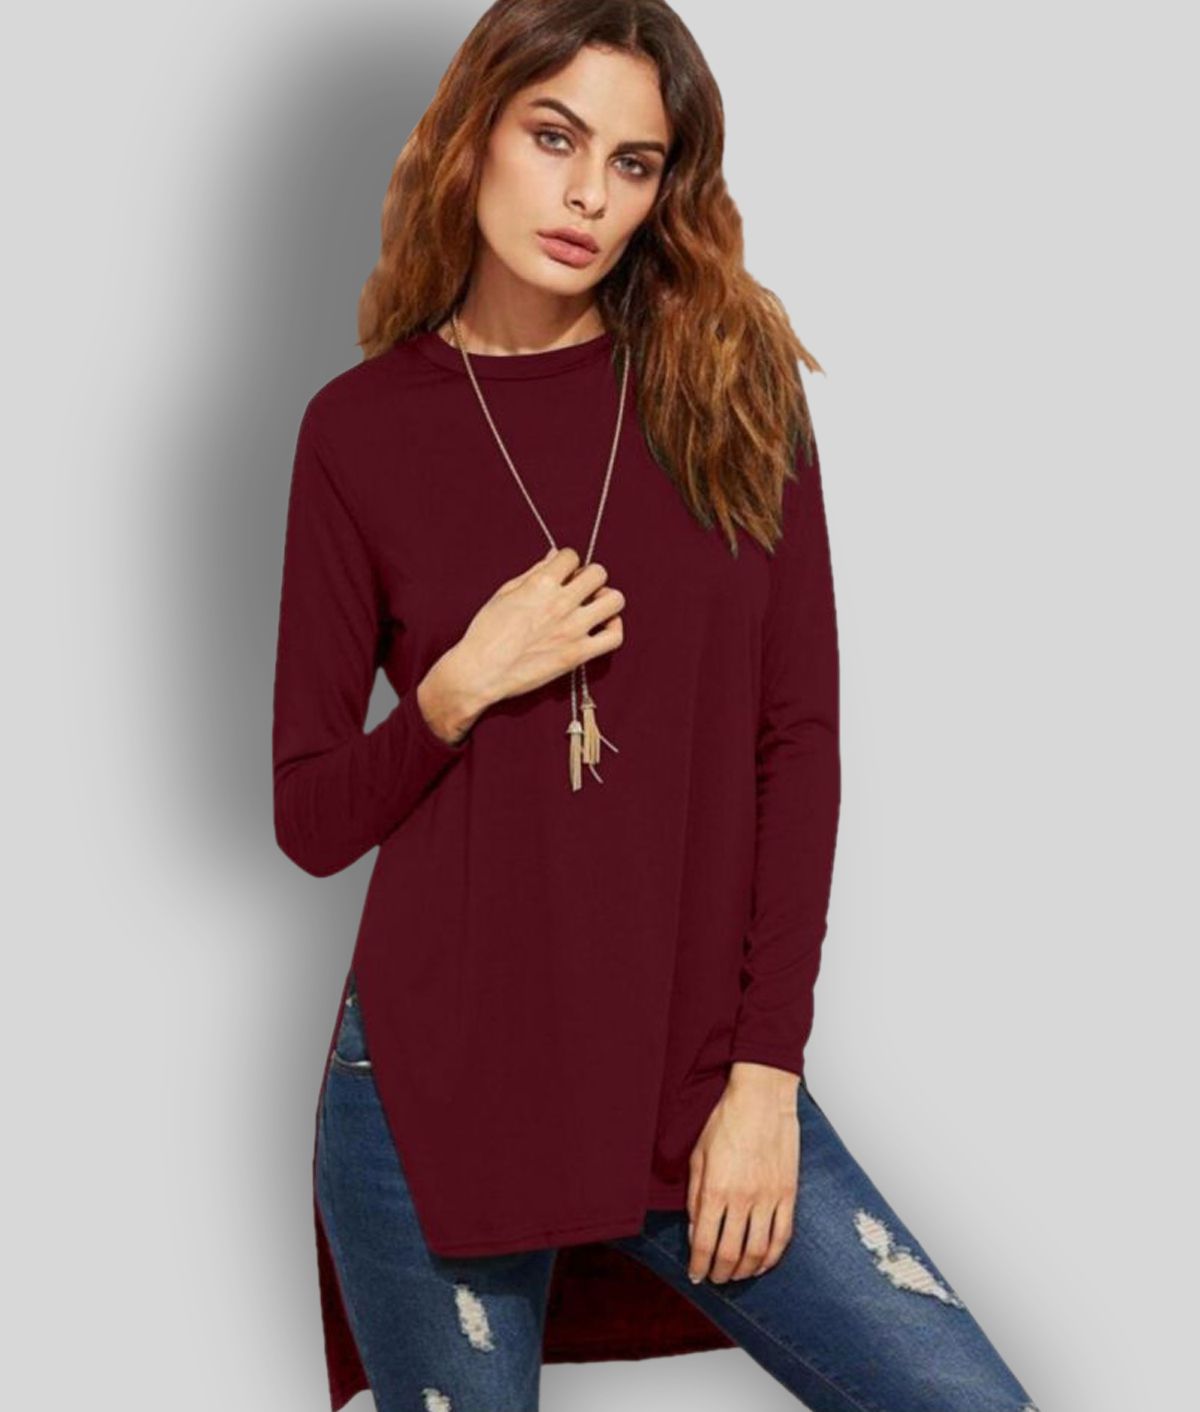     			Dream Beauty Fashion - Maroon Cotton Blend Women's A-Line Top ( Pack of 1 )